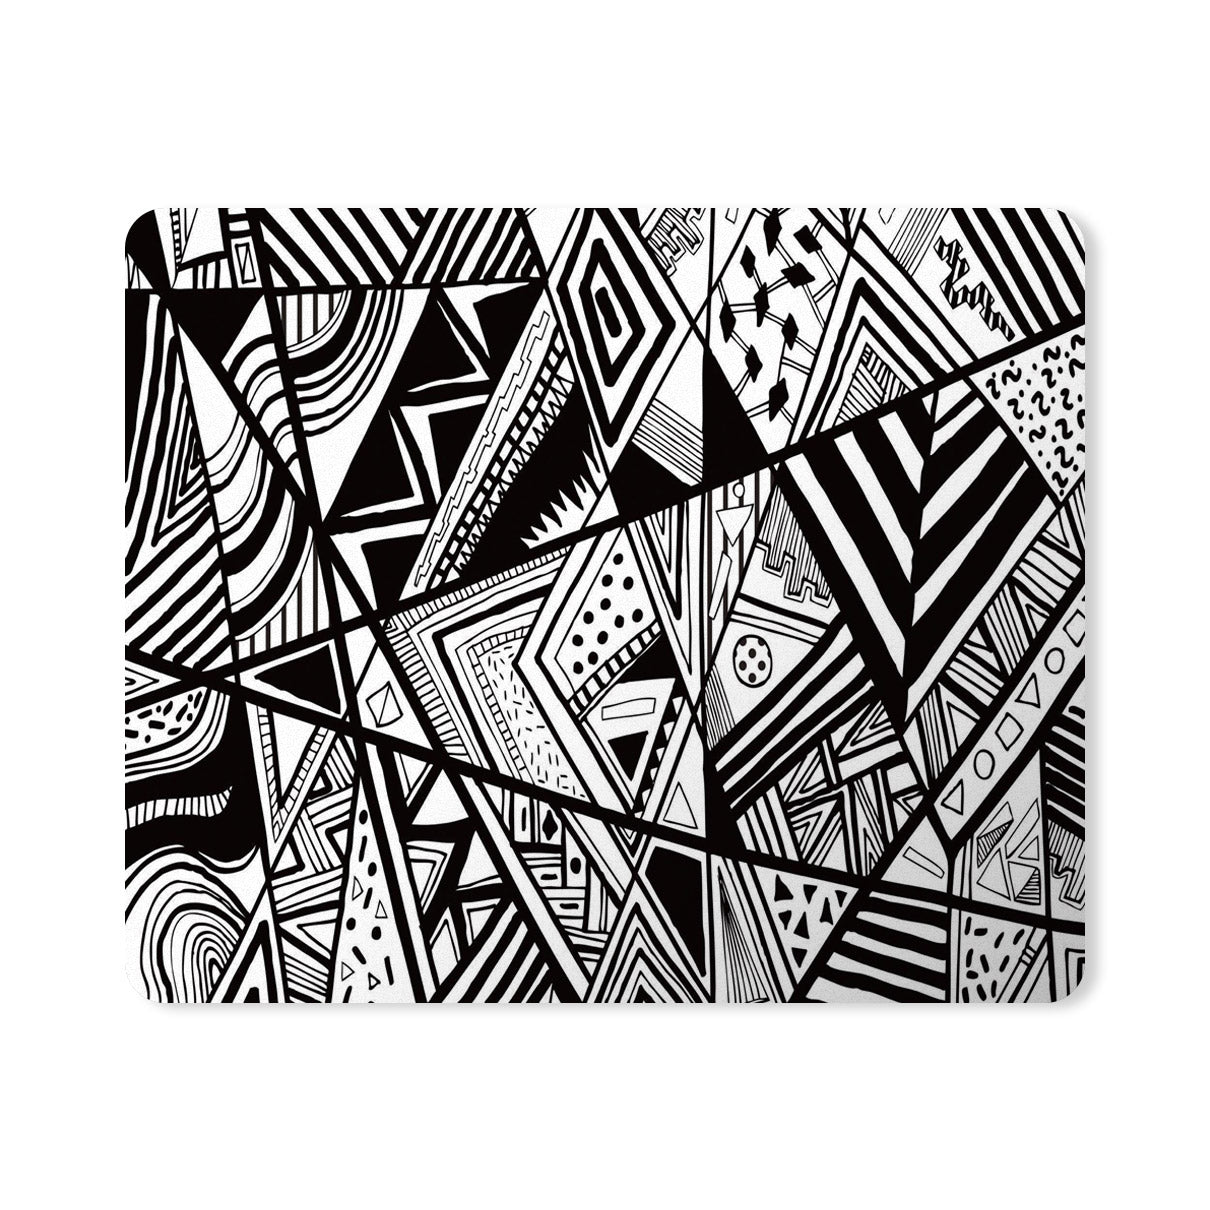 Abstract Black White Pattern Designer Printed Premium Mouse pad (9 in x 7.5 in)